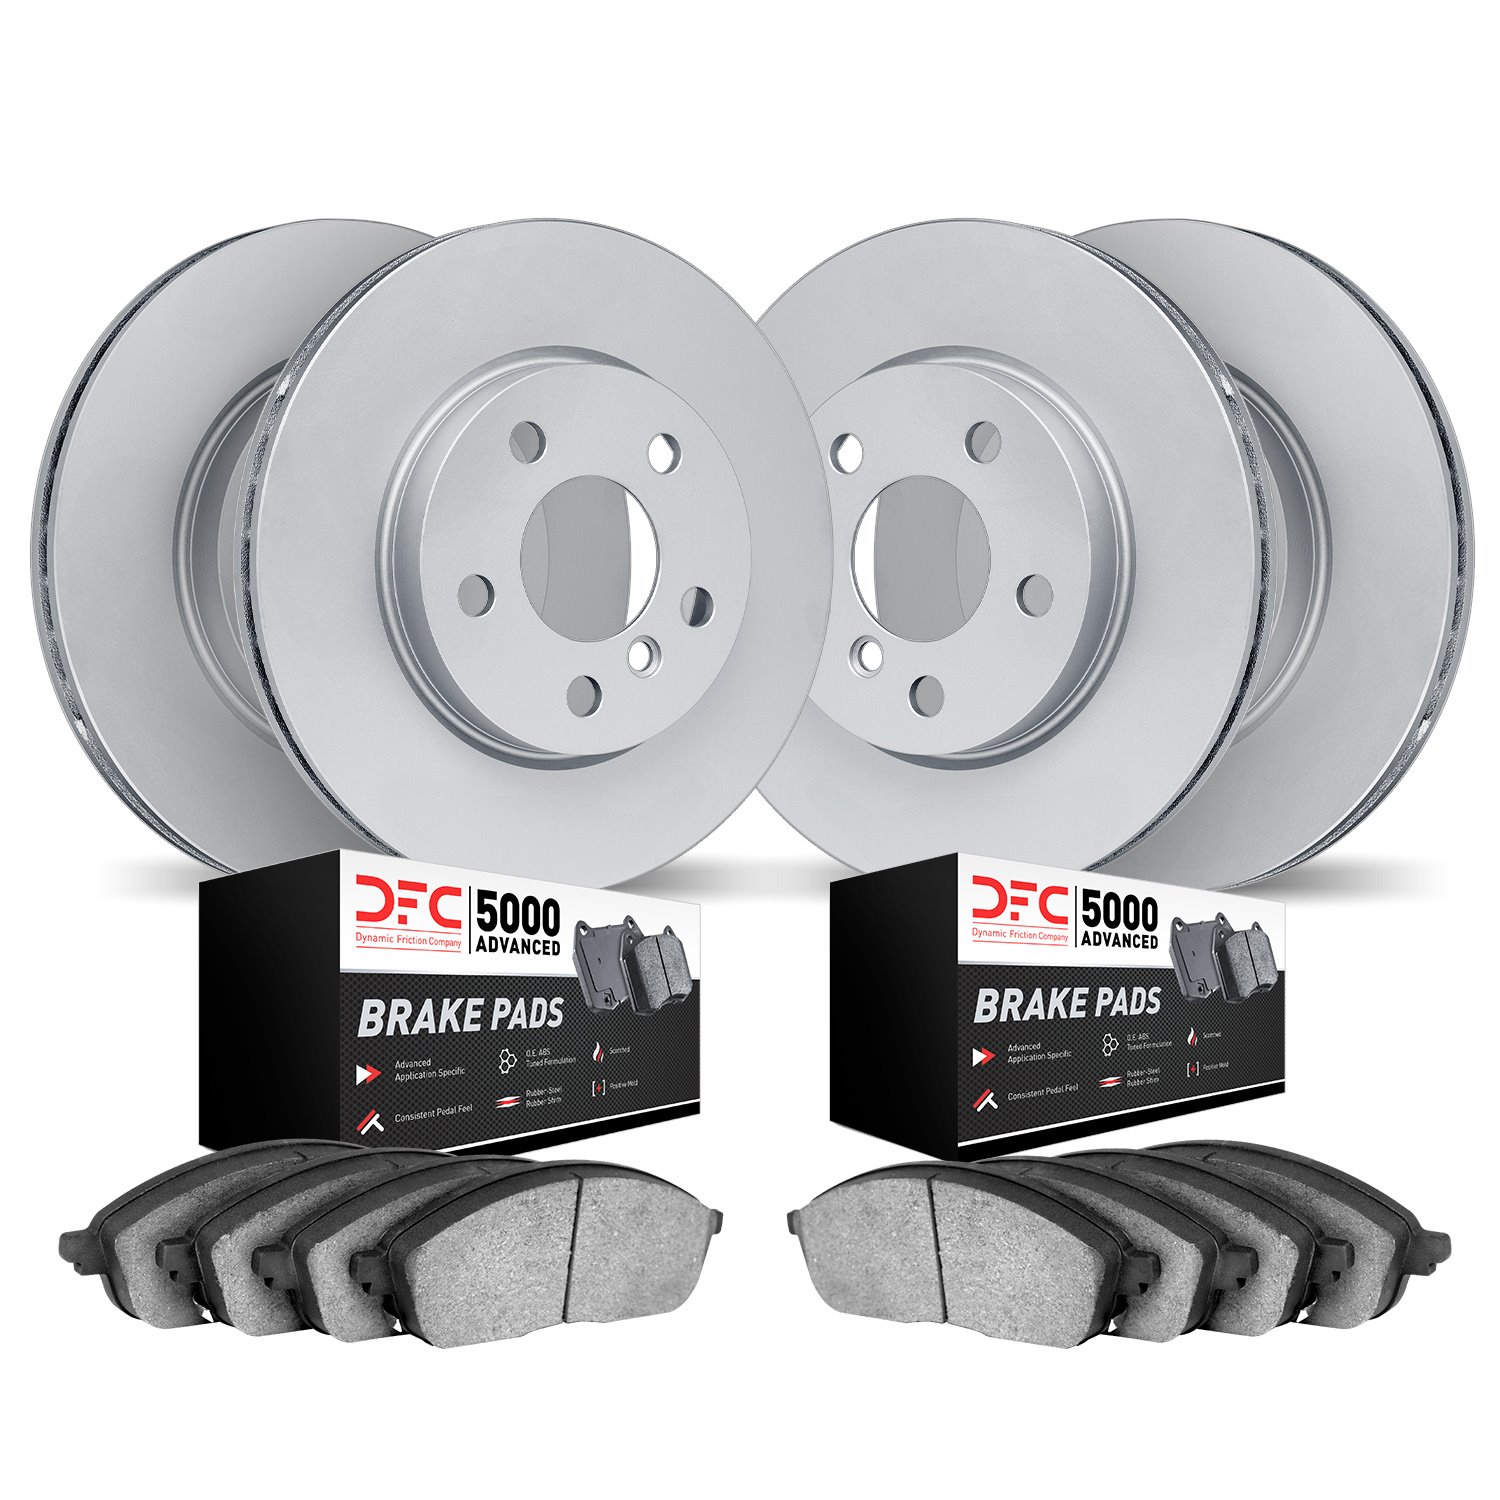 9504-63125 GEOMET Brake Rotors w/5000 Advanced Brake Pads Kit, 2014-2019 Mercedes-Benz, Position: Front and Rear